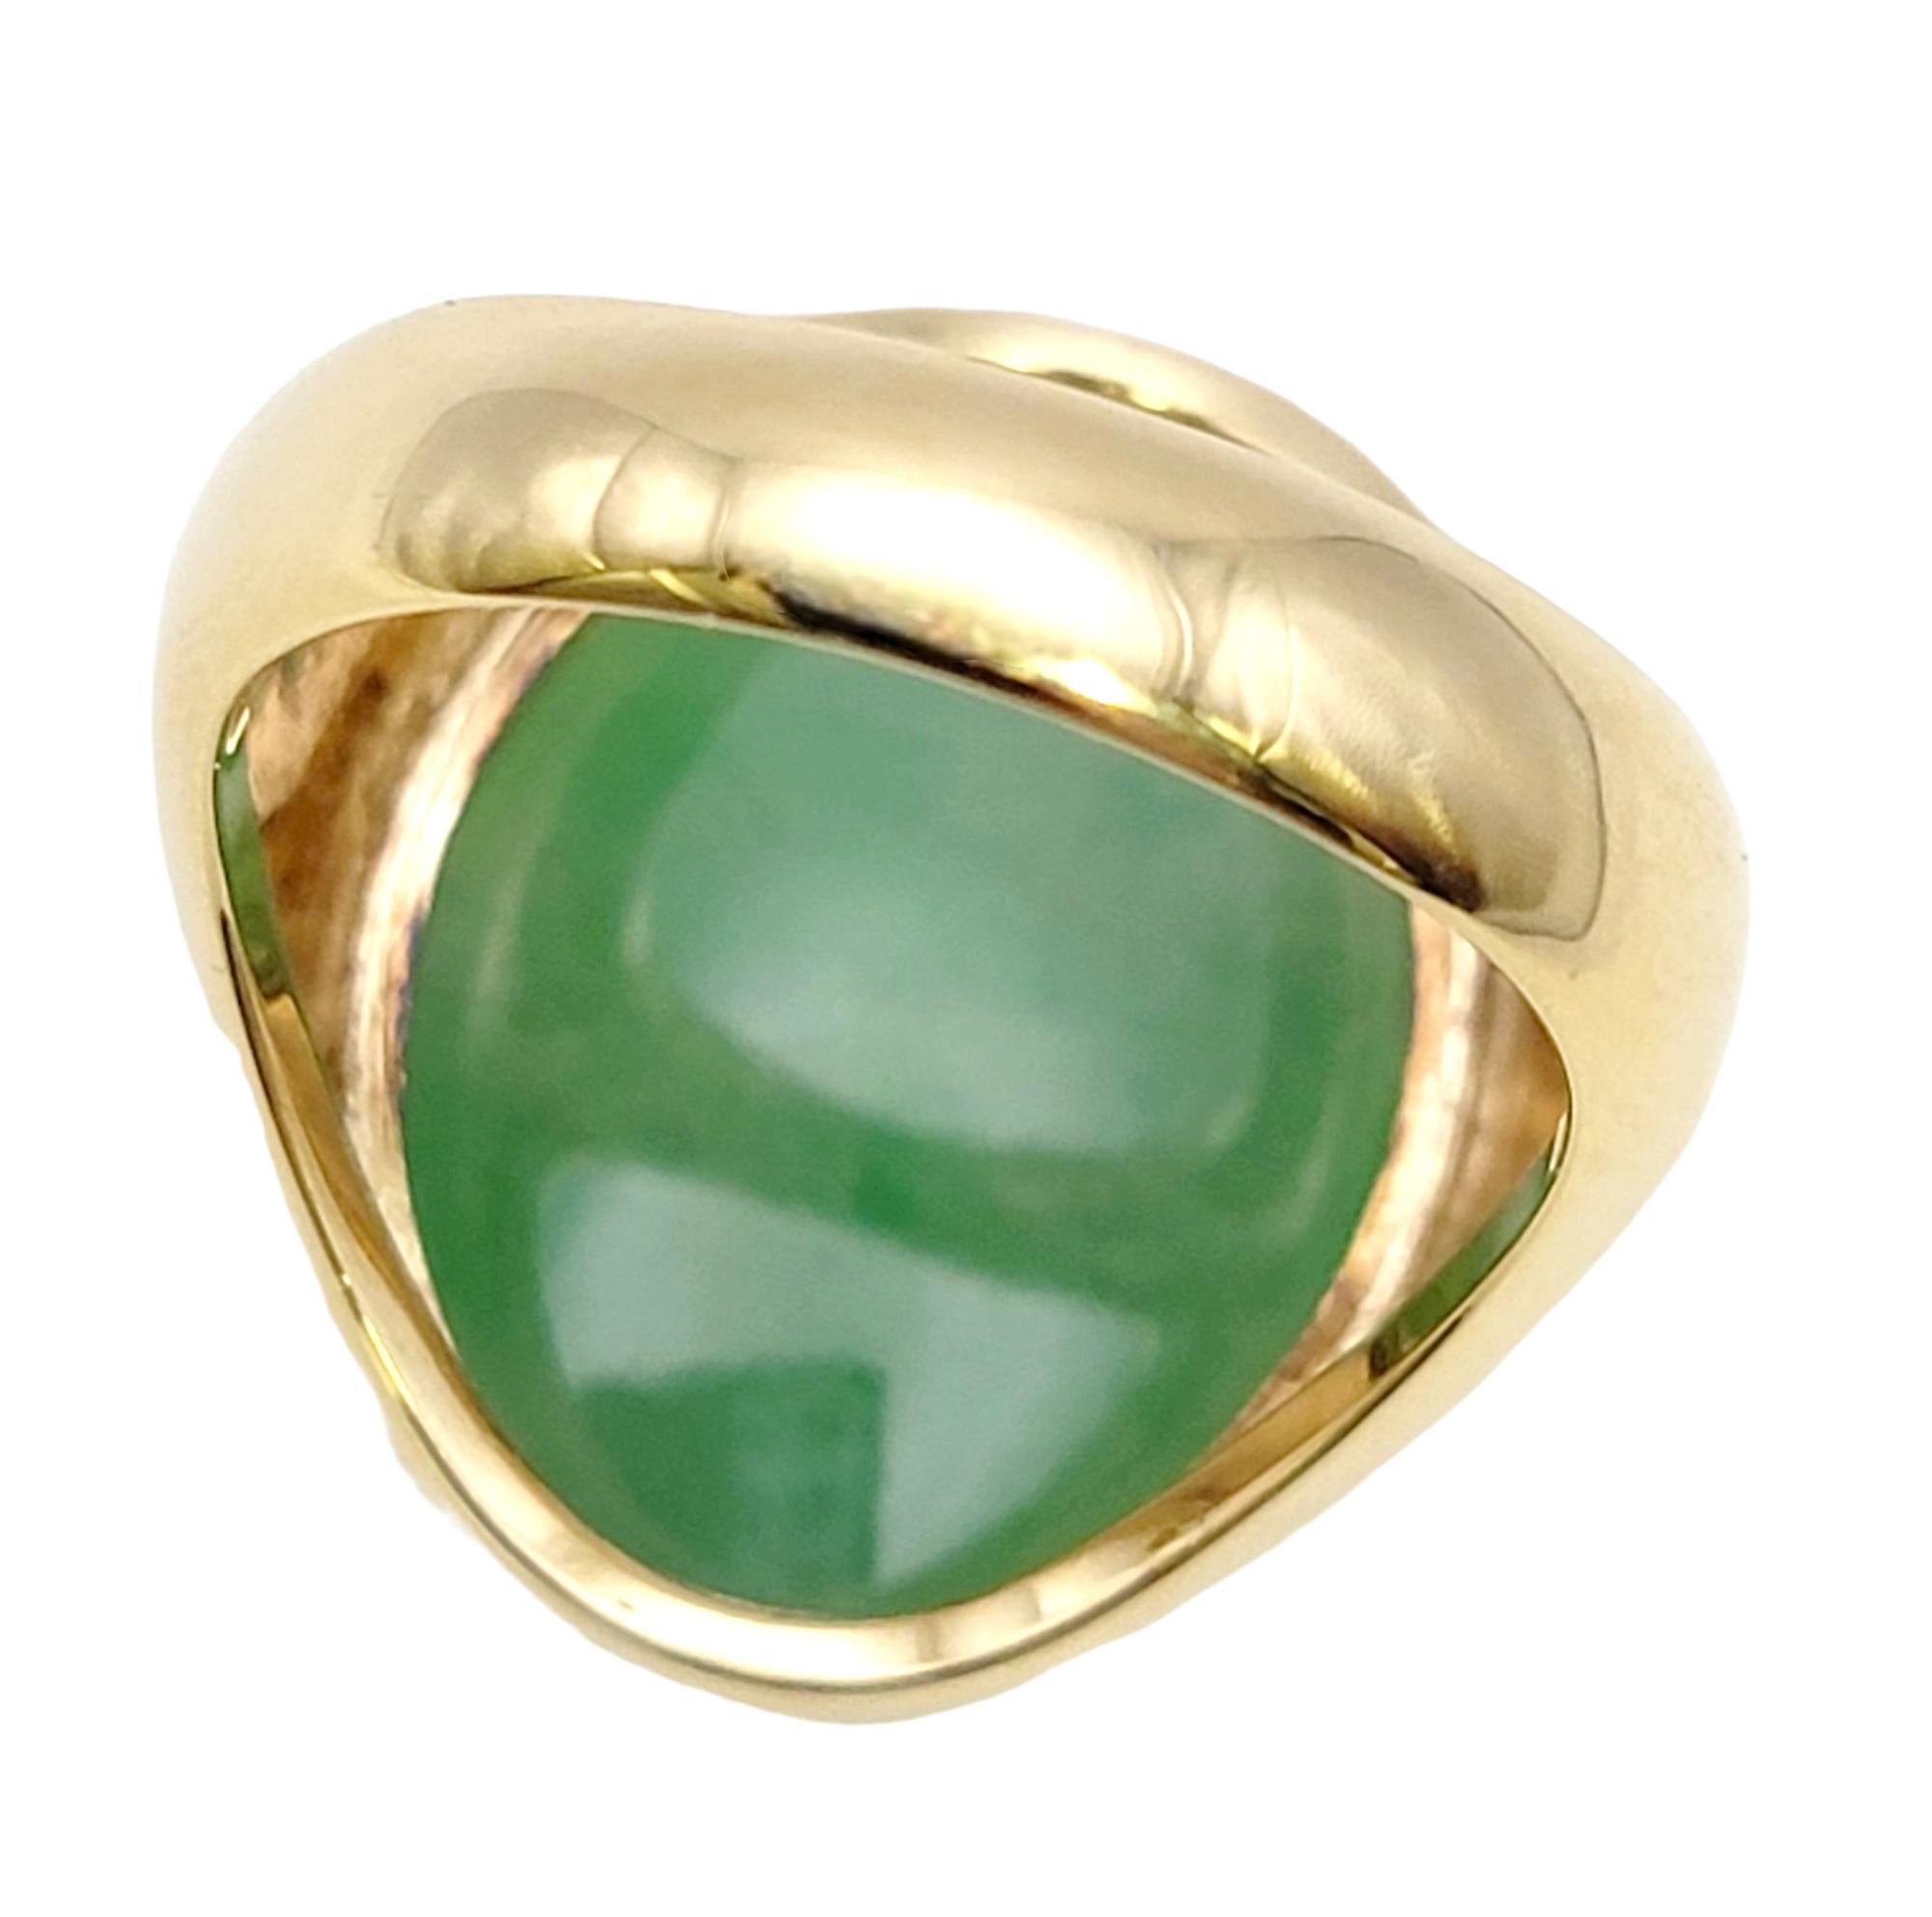 Solitaire Oval Cabochon Light Green Jadeite Ring in 14 Karat Yellow Gold Unisex In Good Condition For Sale In Scottsdale, AZ